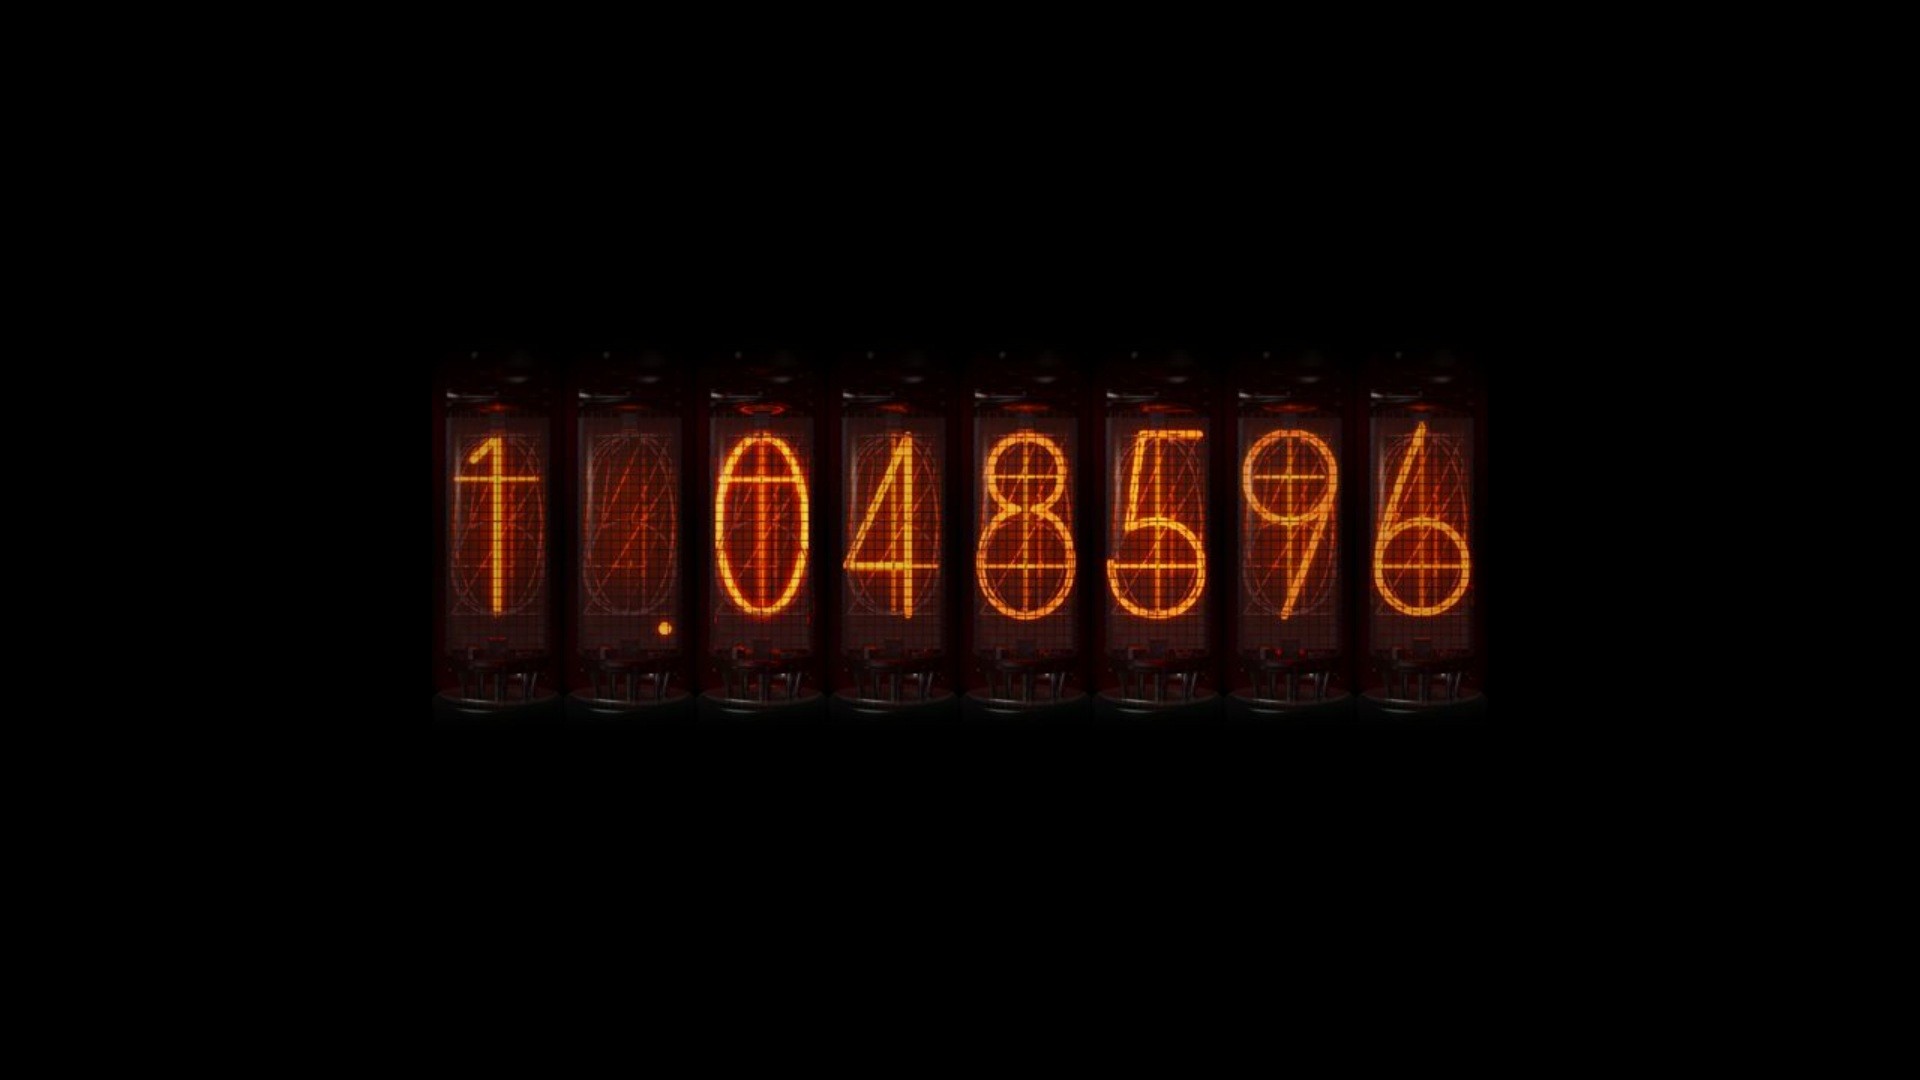 General 1920x1080 Steins;Gate anime time travel Divergence Meter Nixie Tubes numbers simple background black background